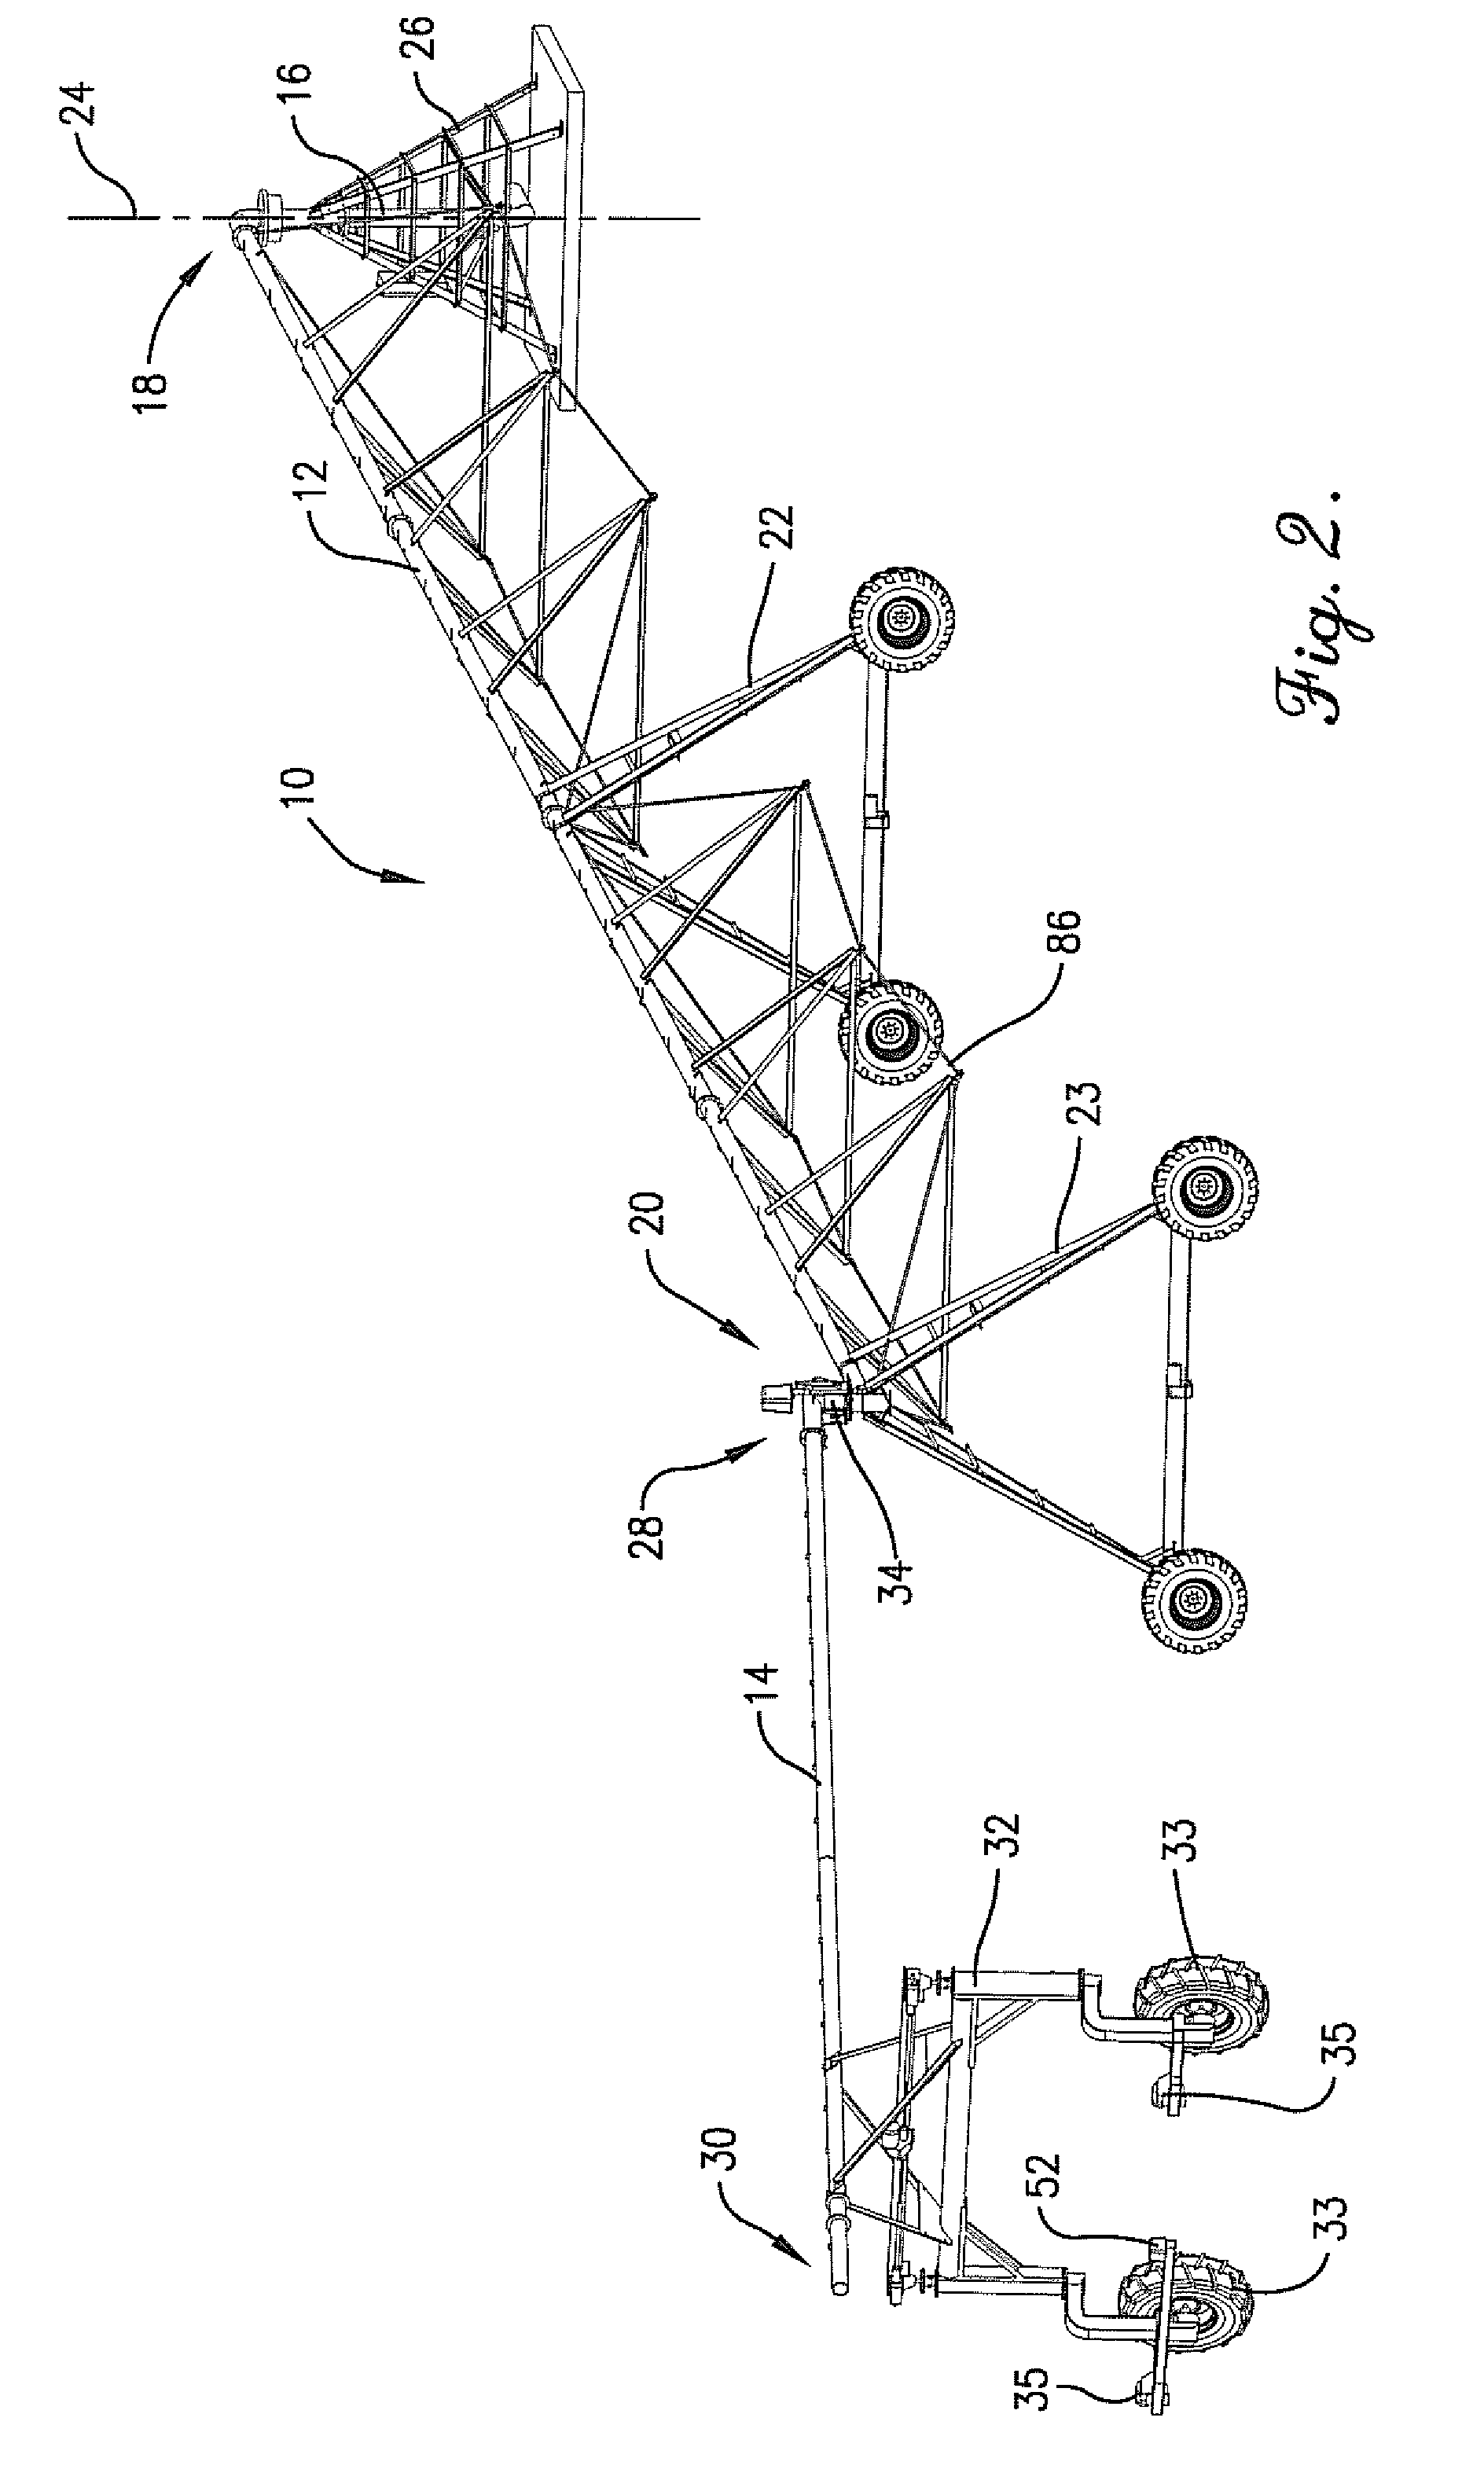 Method, apparatus, and computer program for irrigating a field space with a center pivot irrigation machine